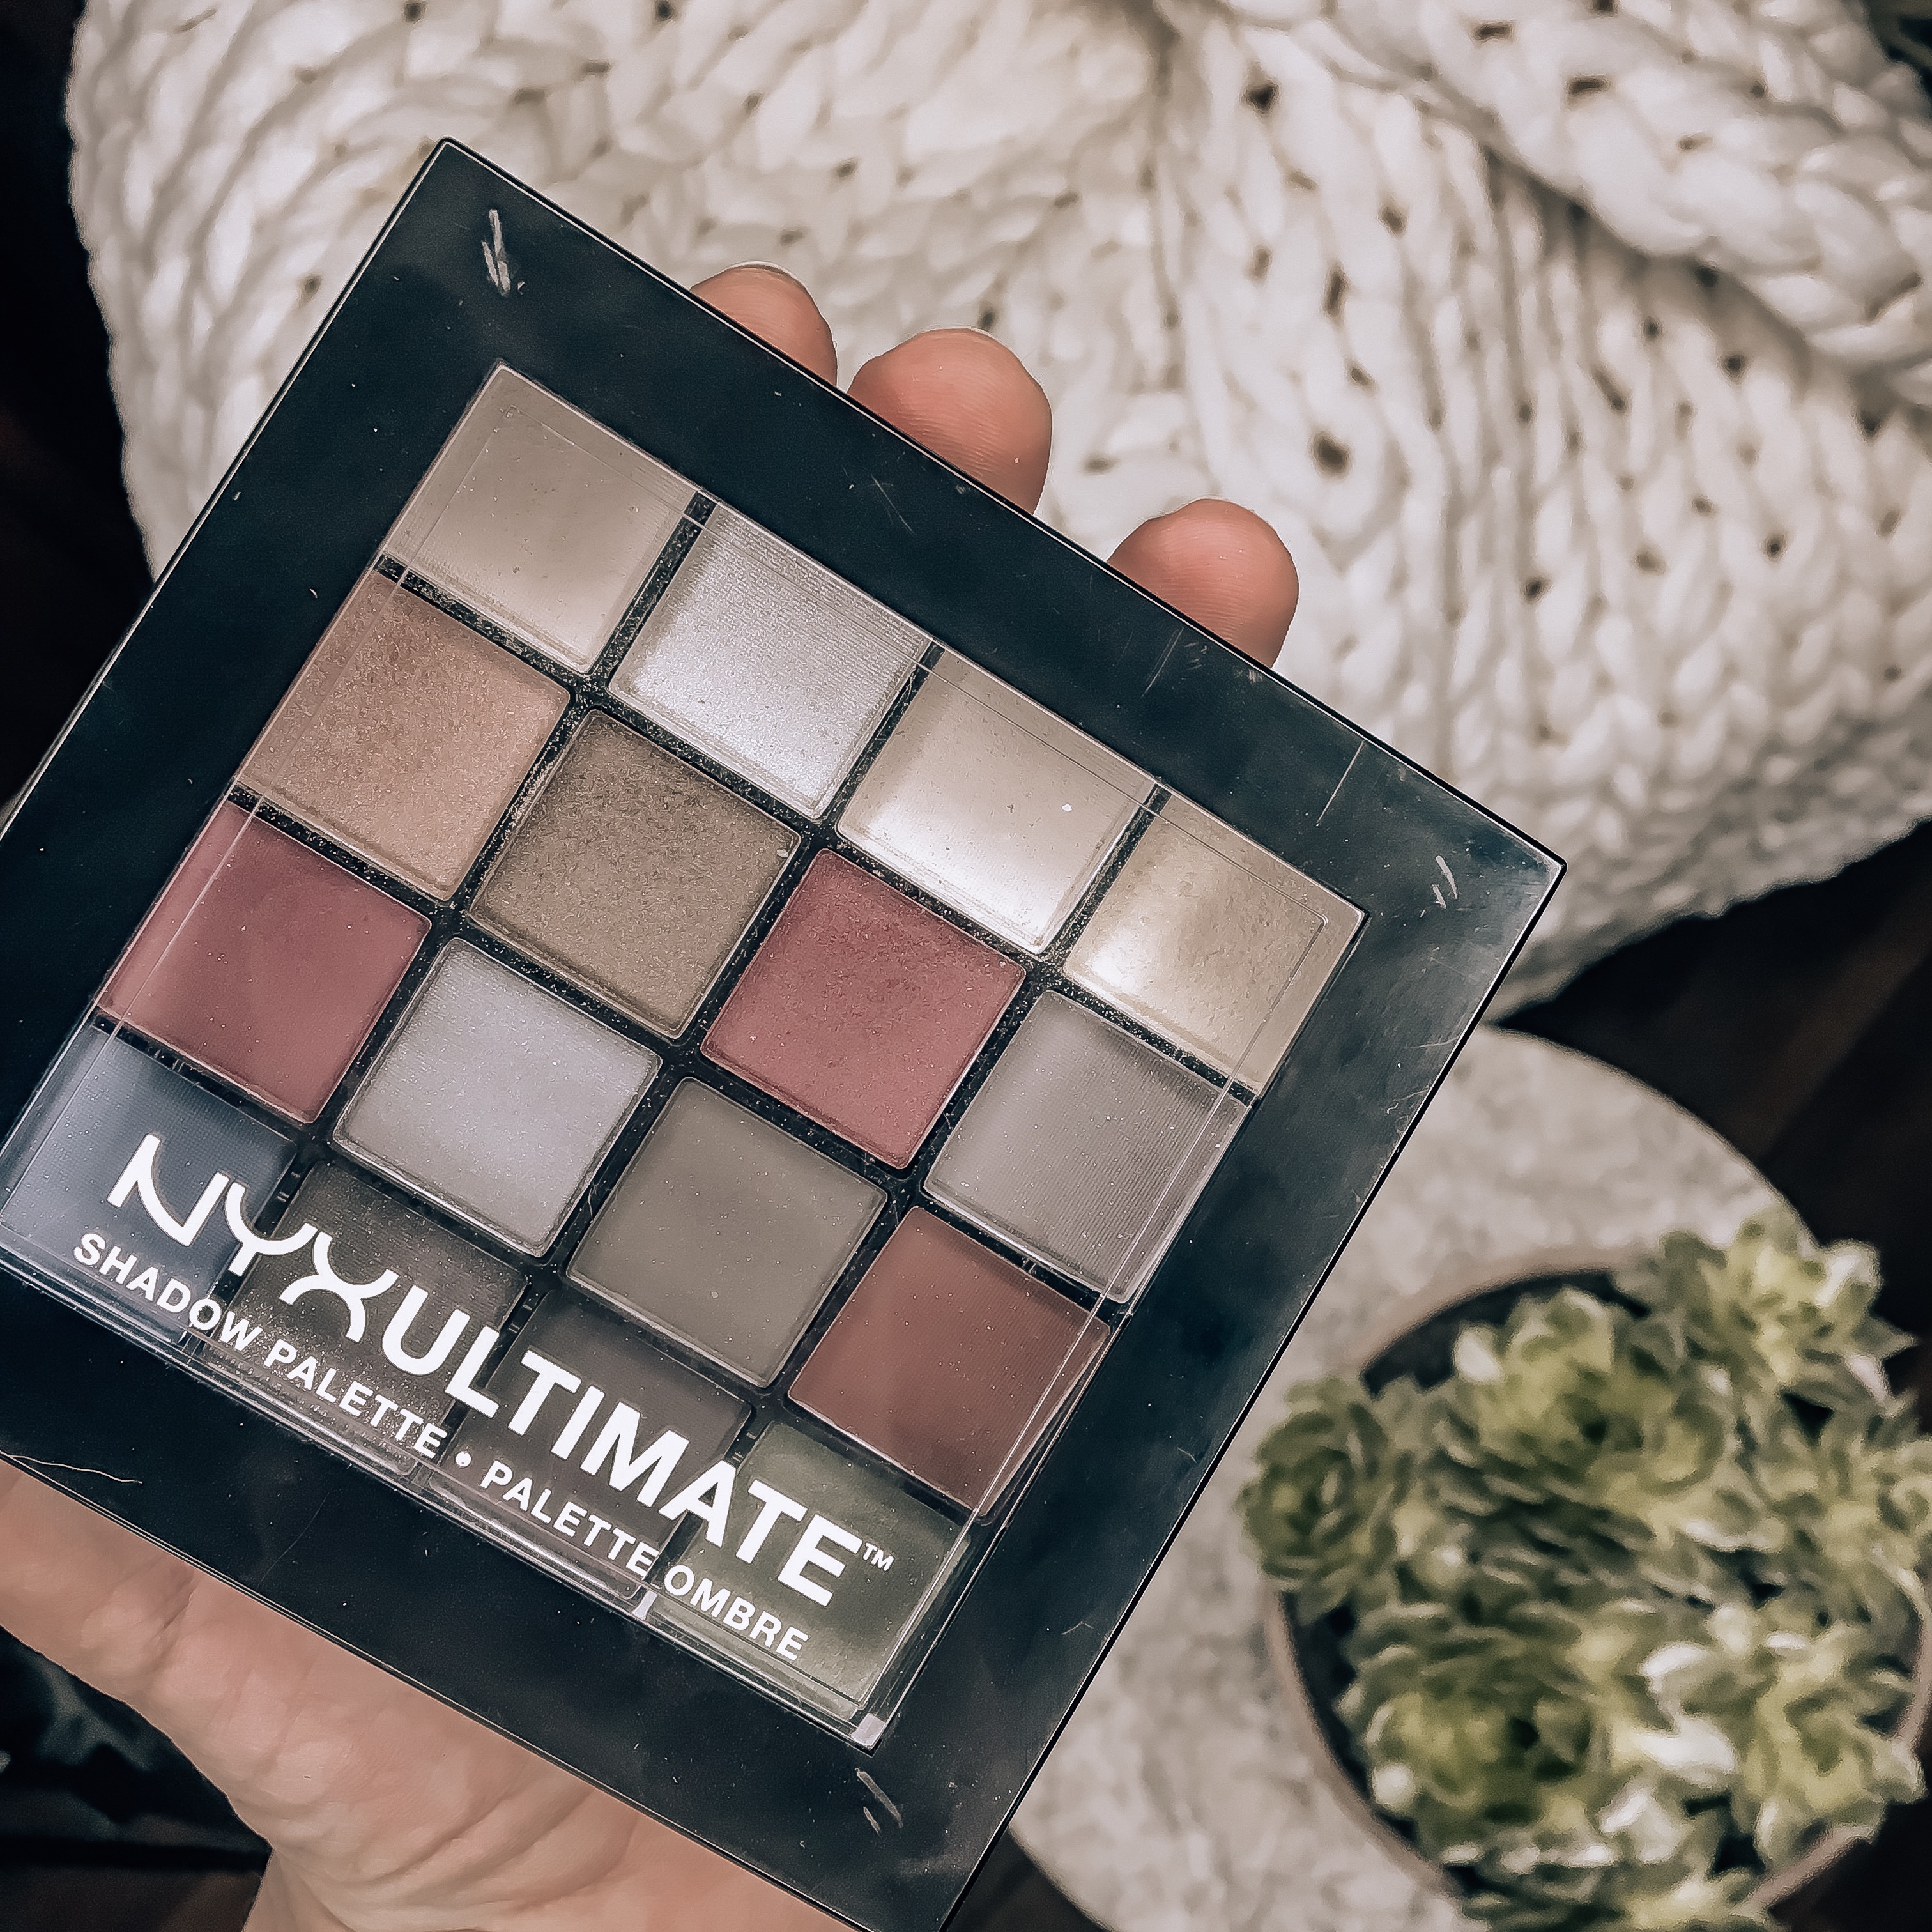 NYX Ultimate eye-shadow palette-June Top 5 Favorite Beauty Products Roundup-blogger-makeup